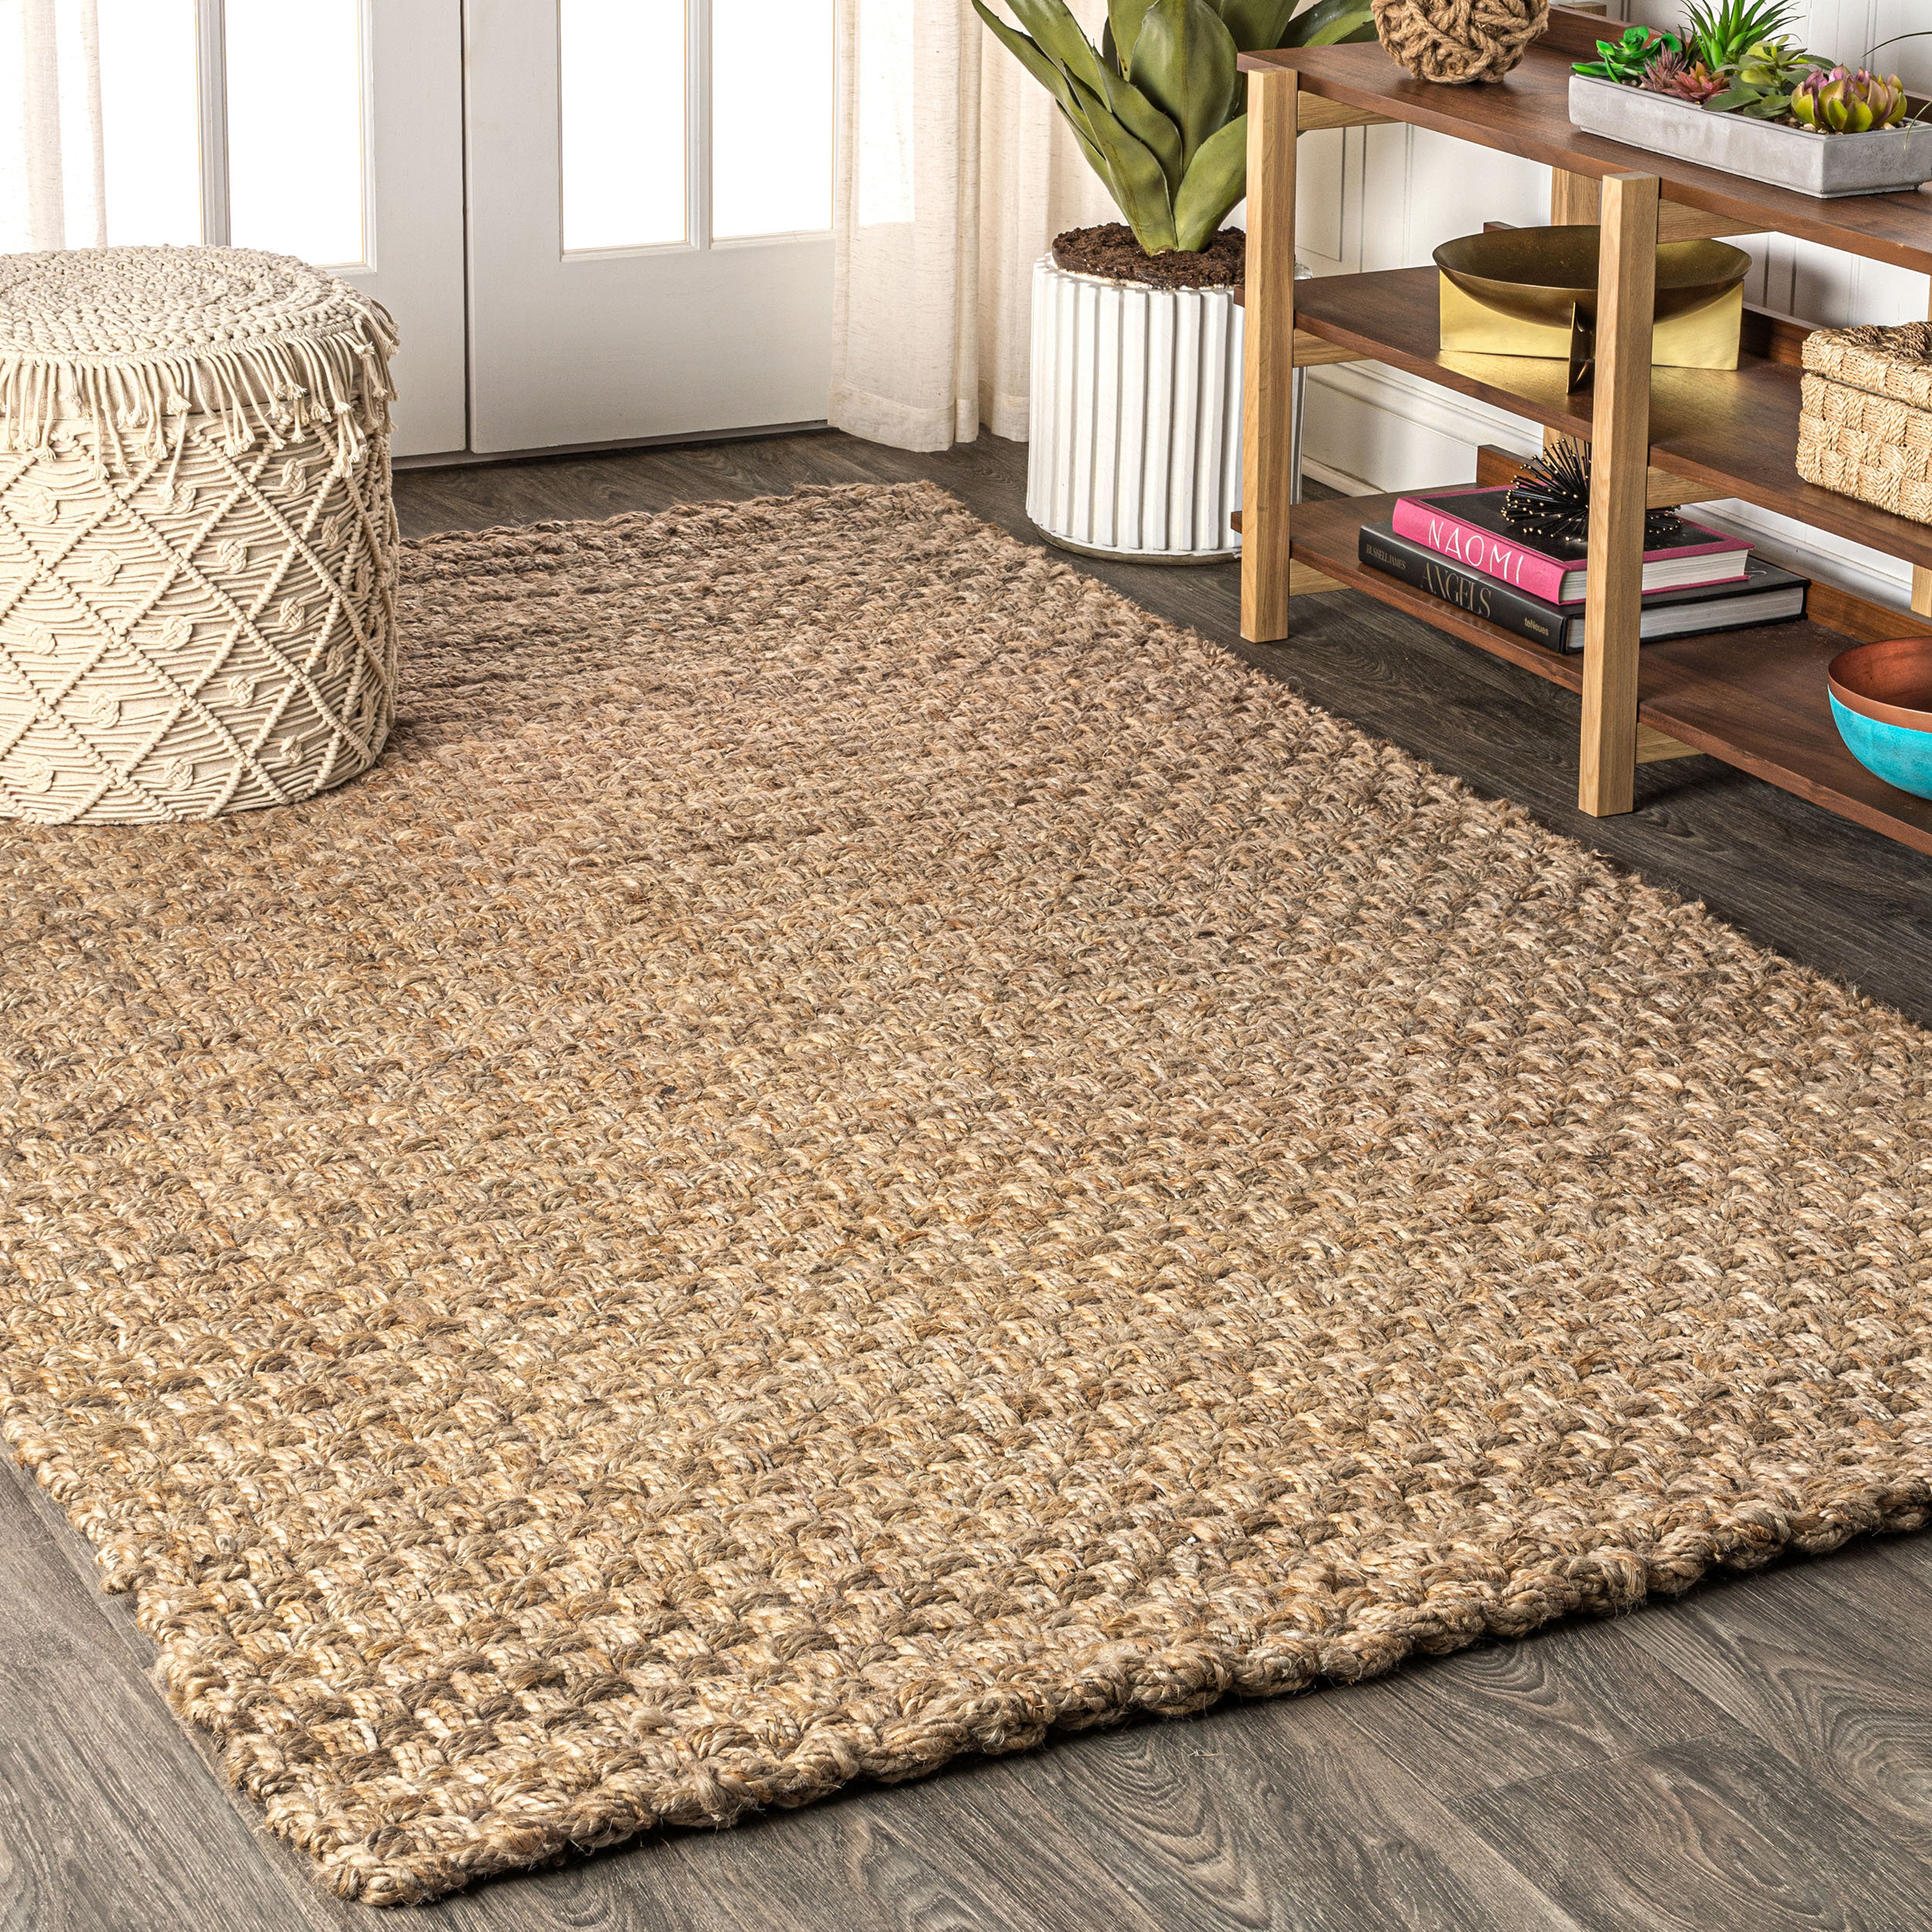 Shoppers Say Their Rugs 'Haven't Moved an Inch' Since Using These Rug Grips